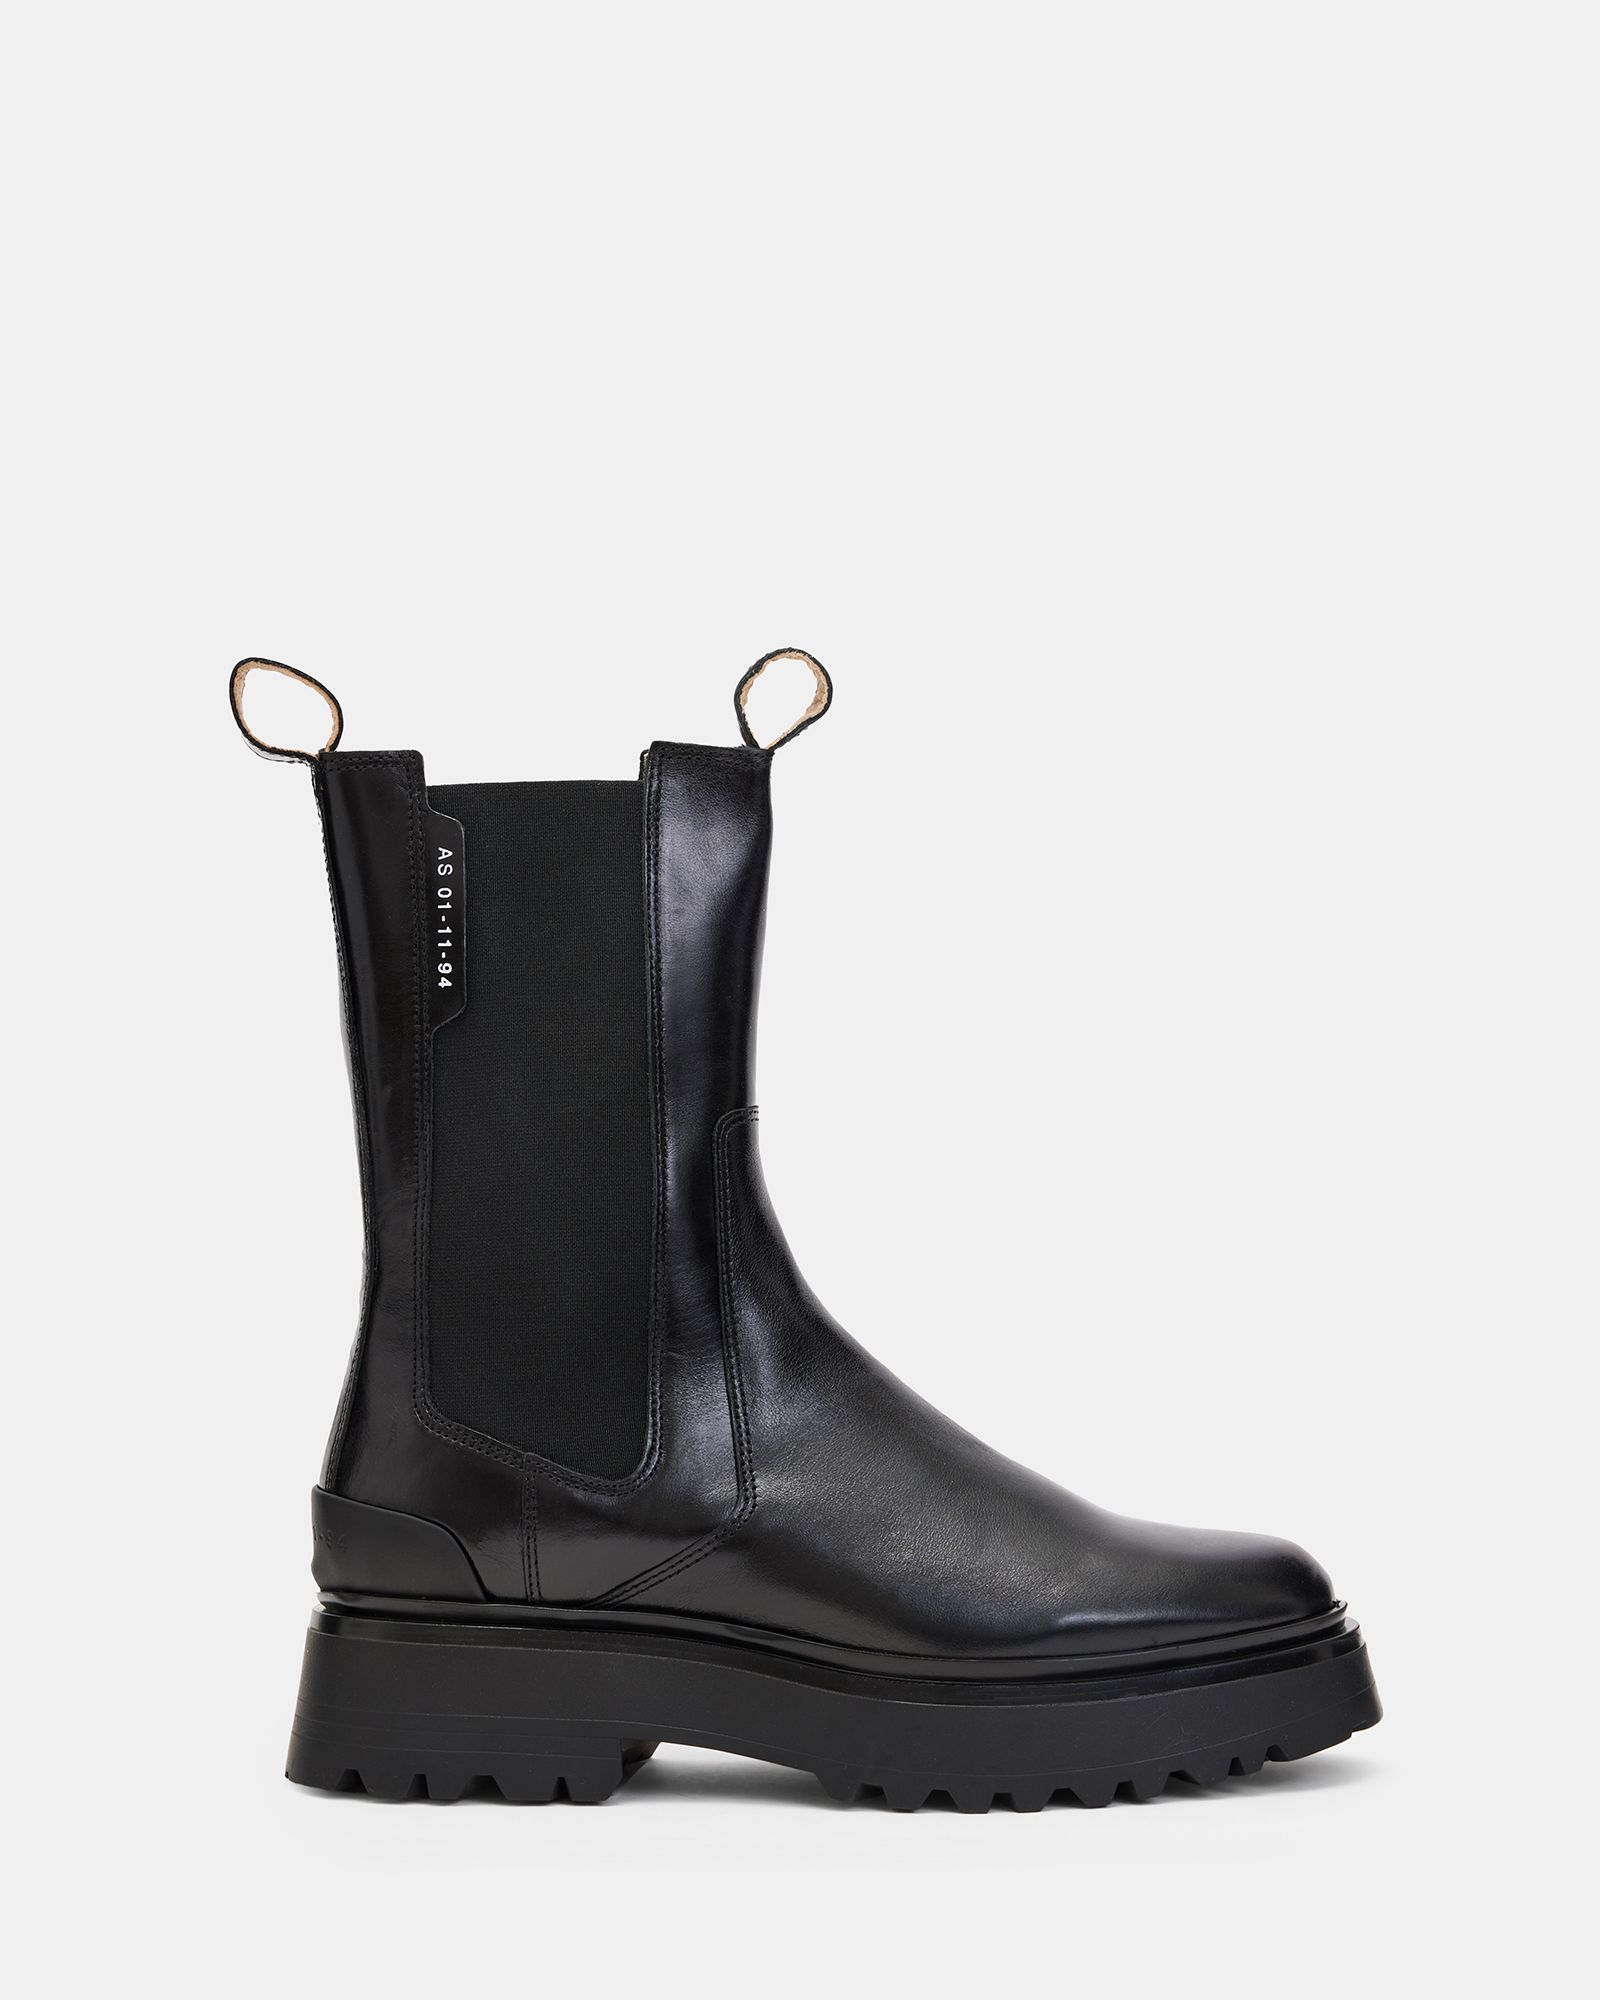 Amber Leather Boots | AllSaints UK